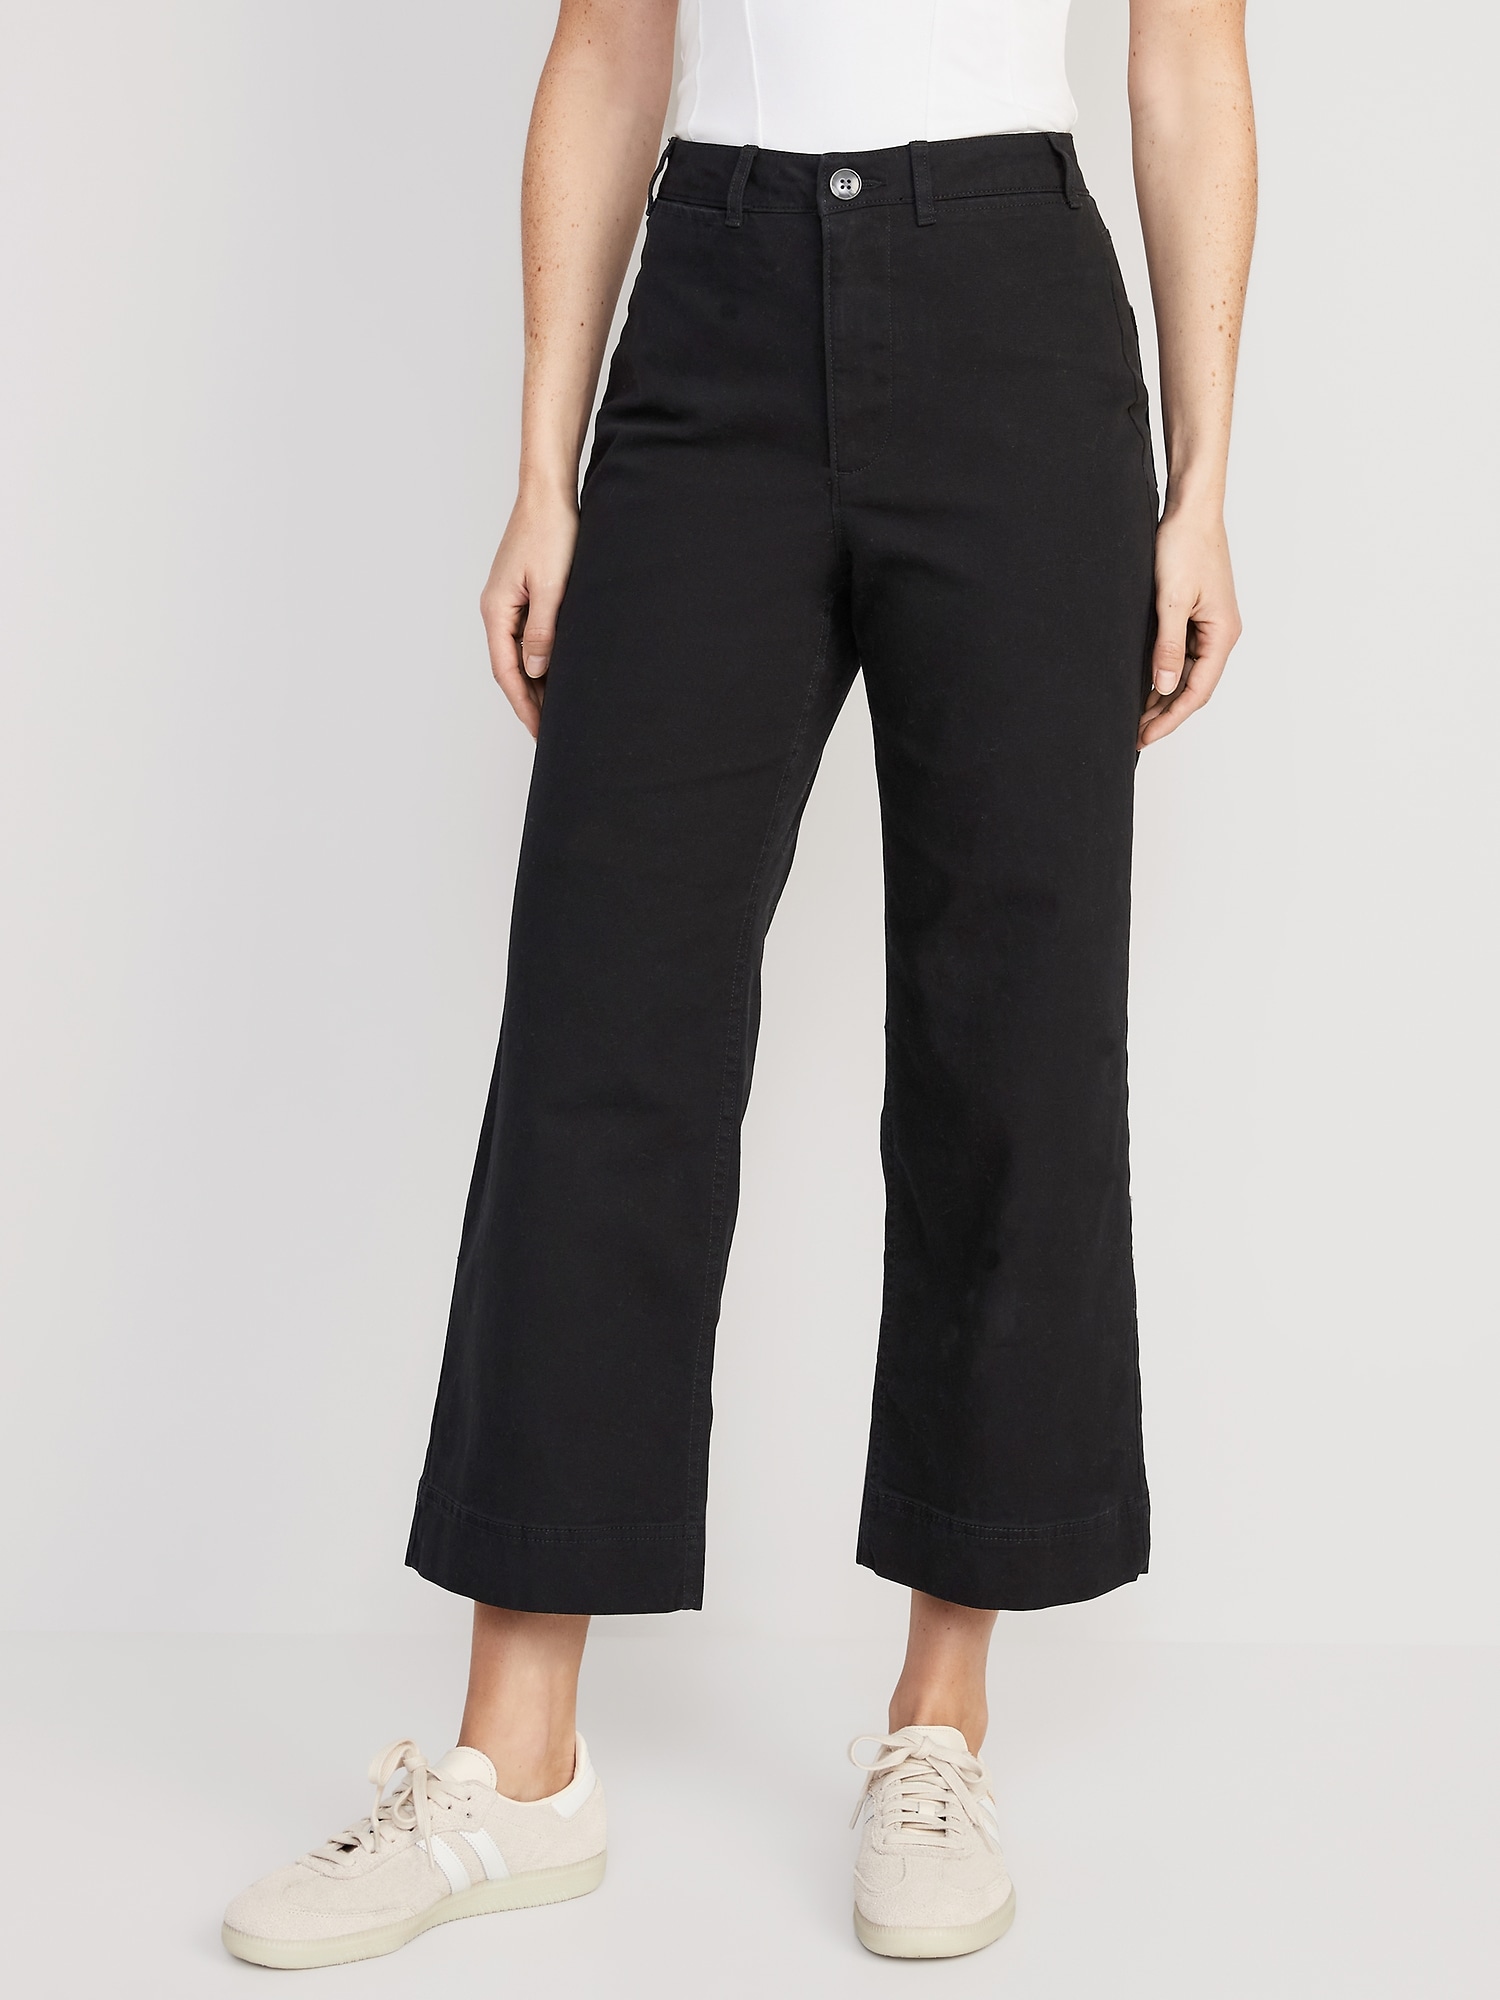 Buttoned-Back Crop + High Waist Pants  Wide leg trousers outfit, White  tank dress, High waisted pants outfit